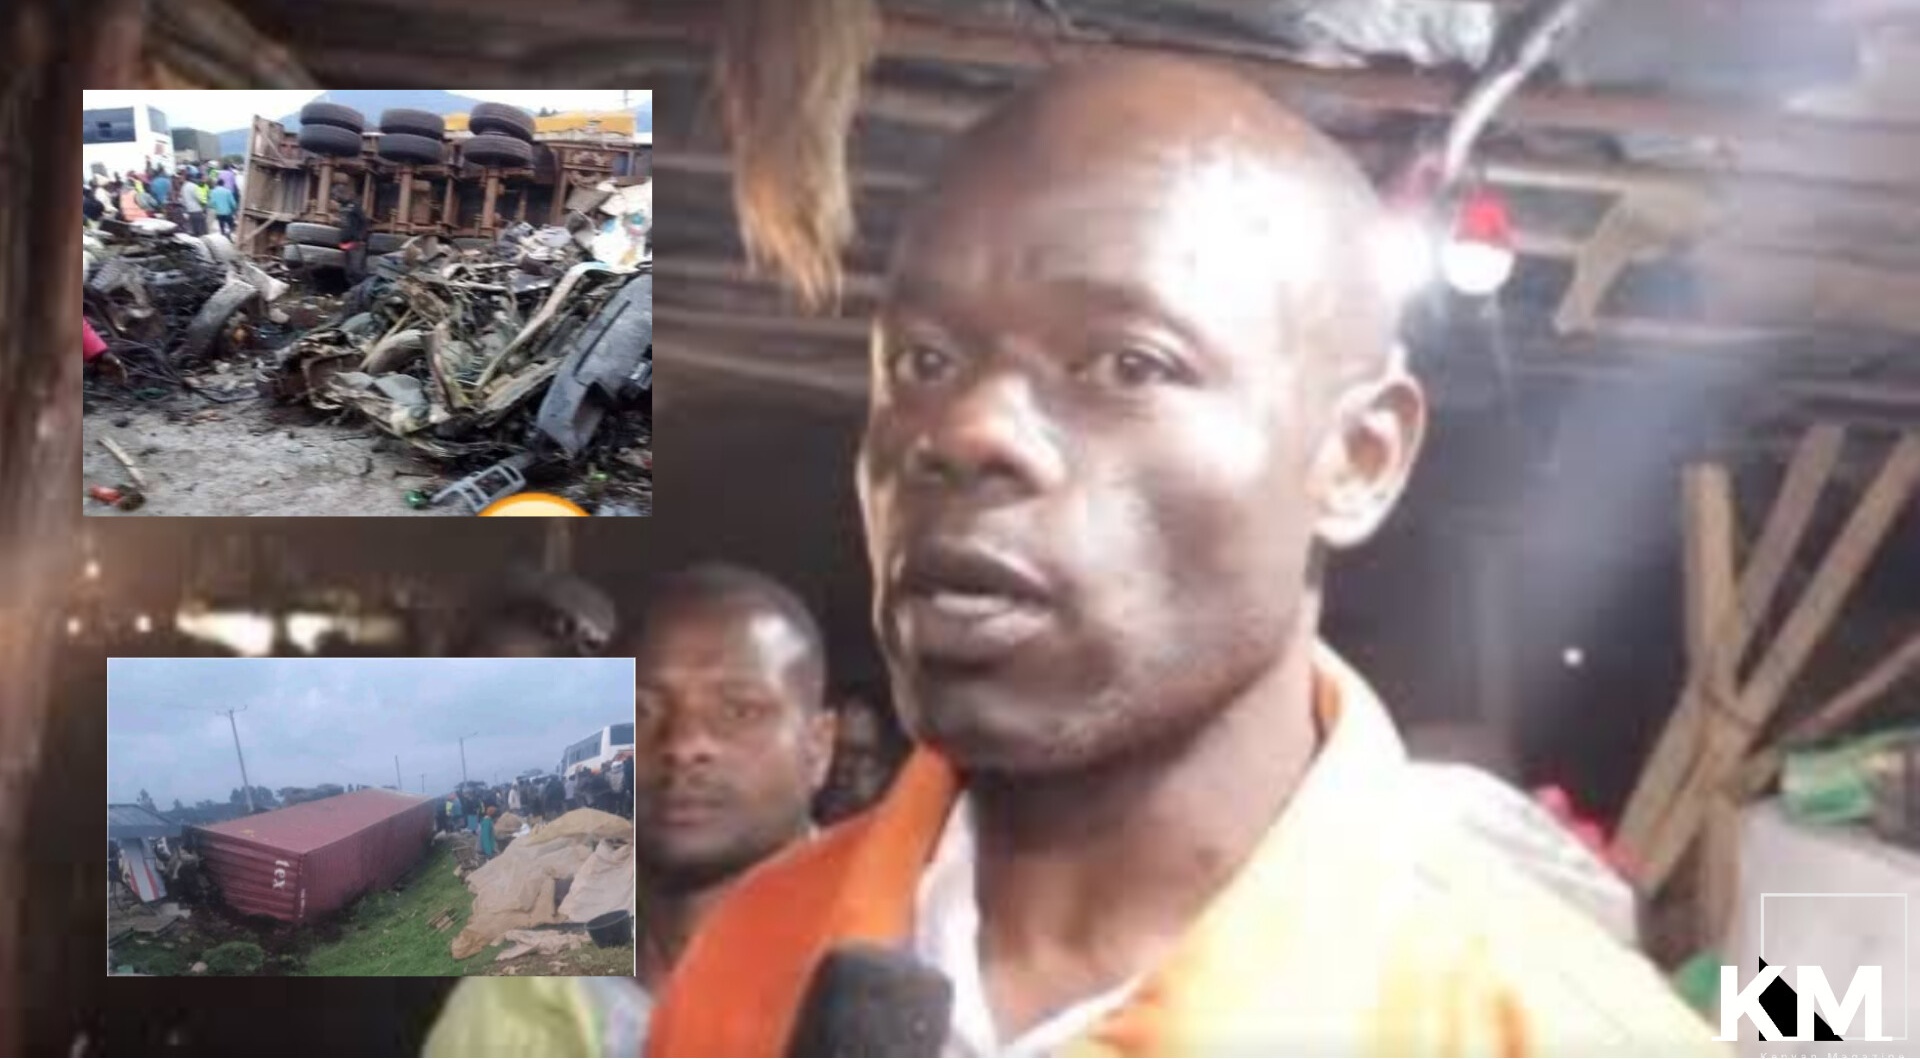 Londiani accident driver speaks